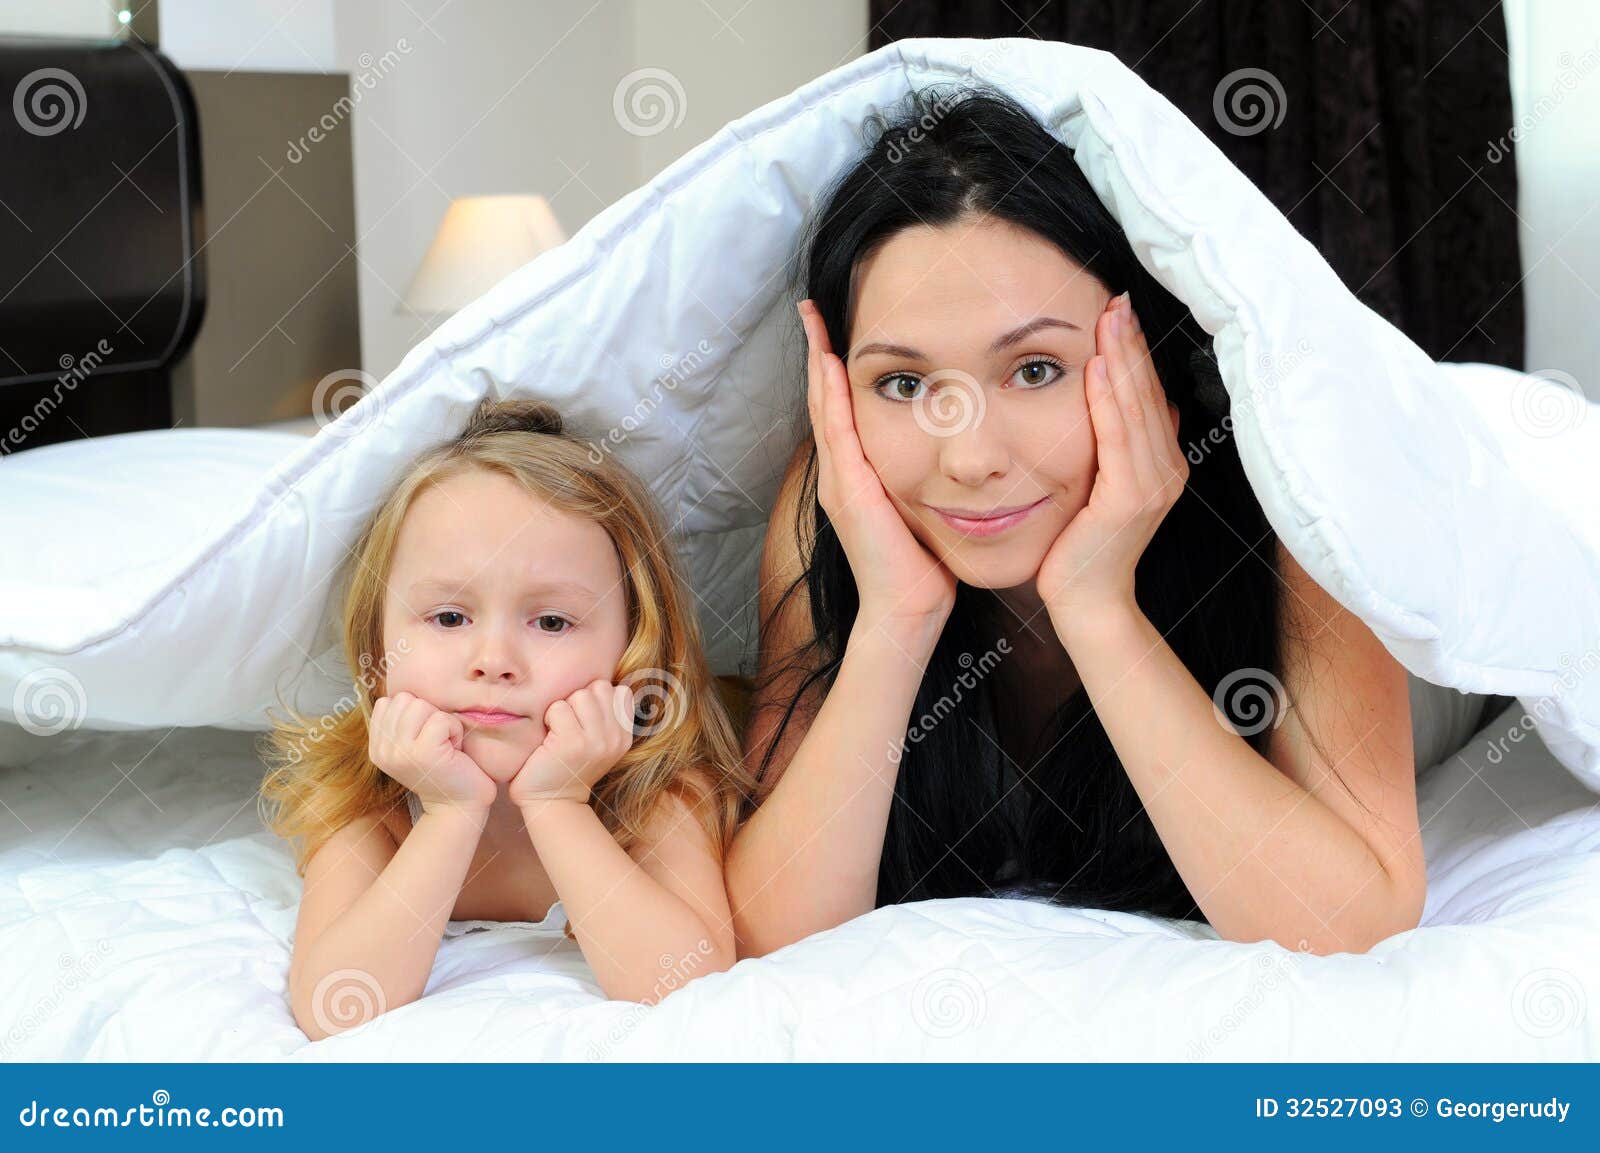 Children in bed stock image. Image of friendship, confidential - 32527093